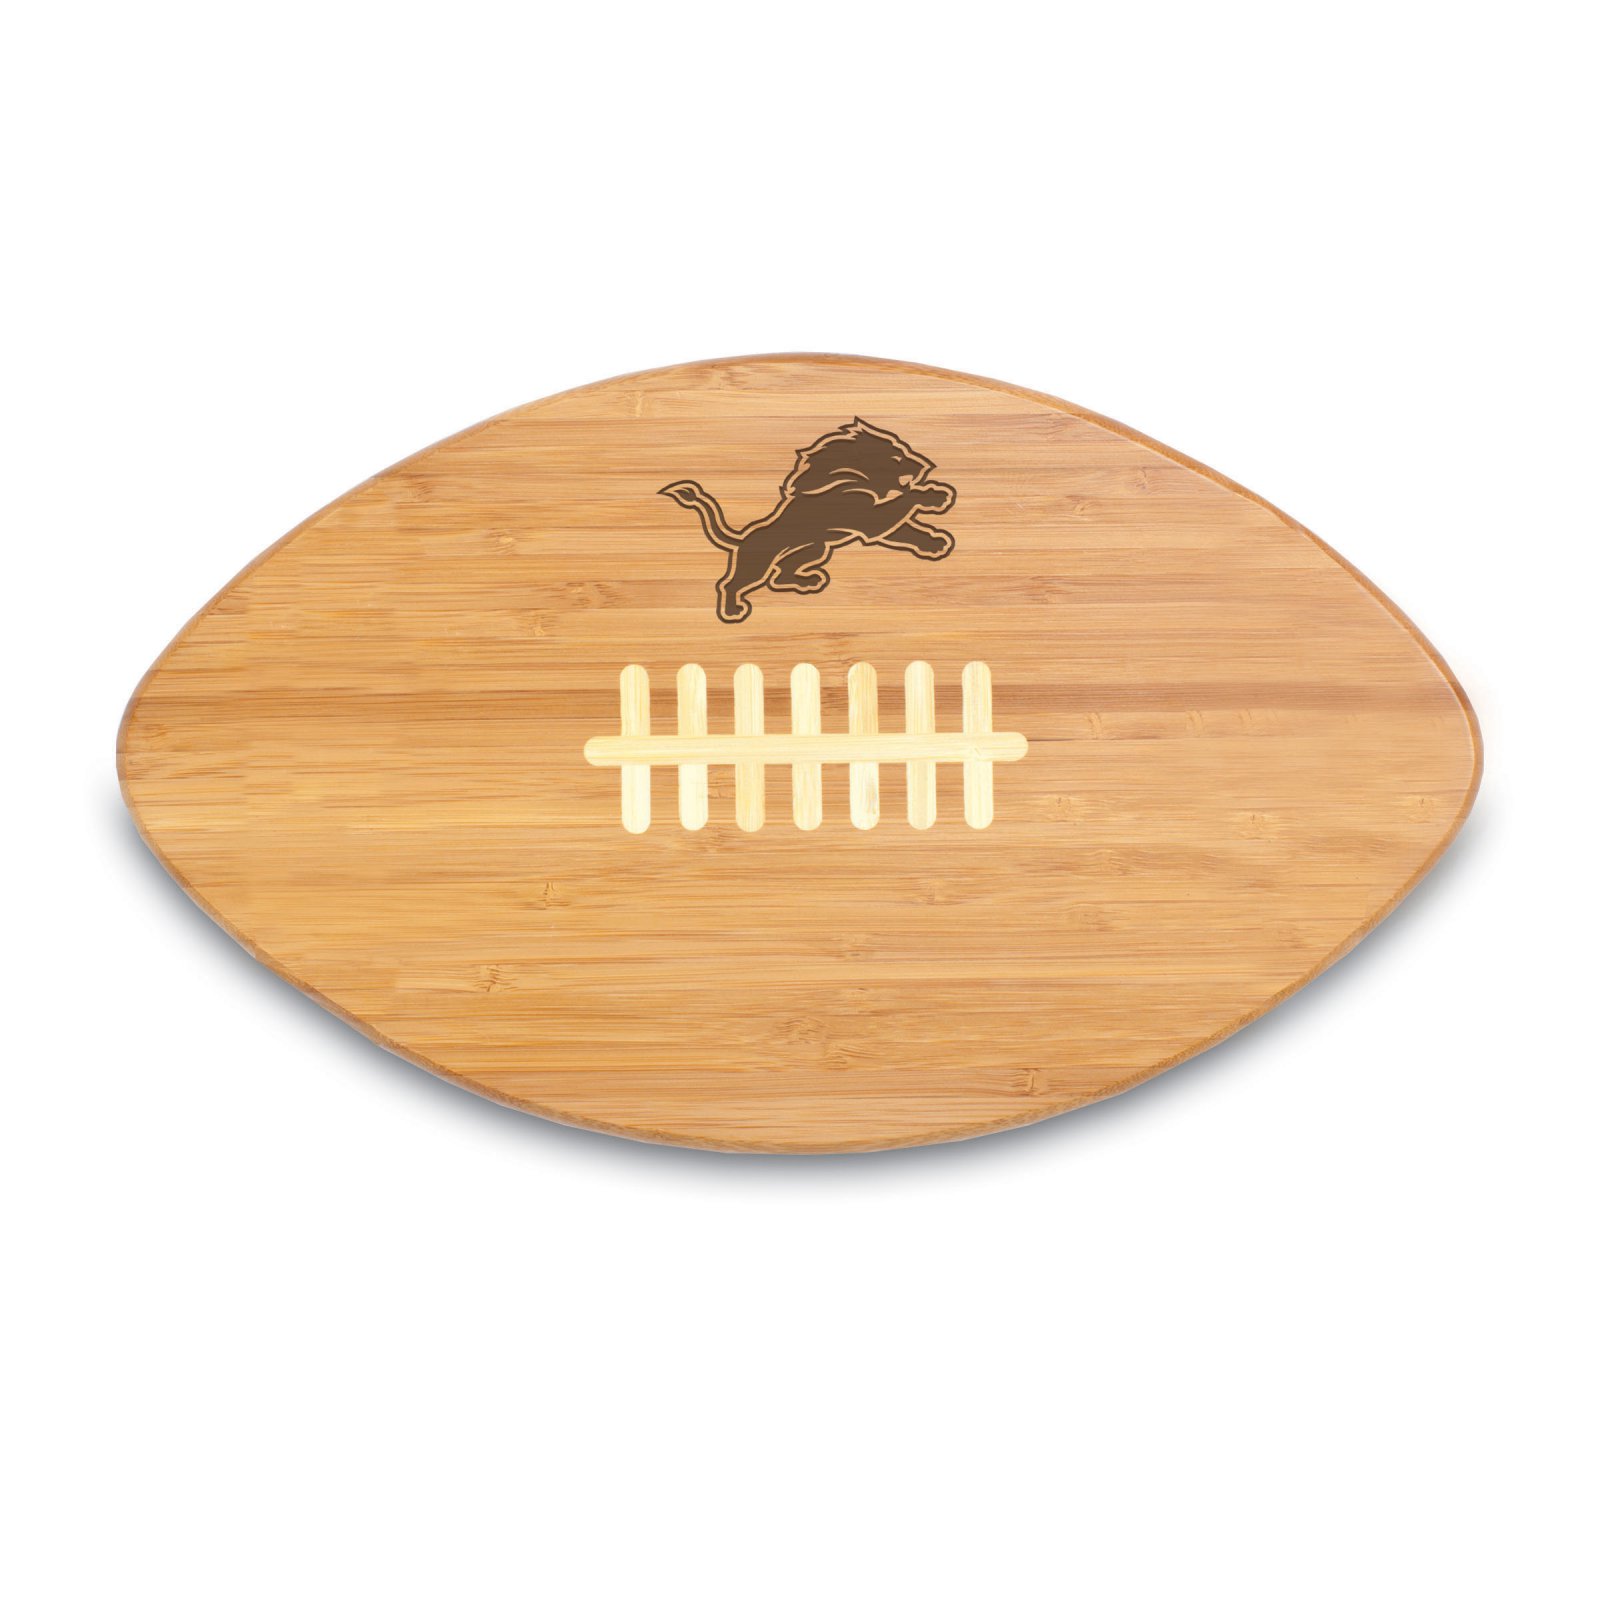 New York Jets Football Cutting Board - image 3 of 5